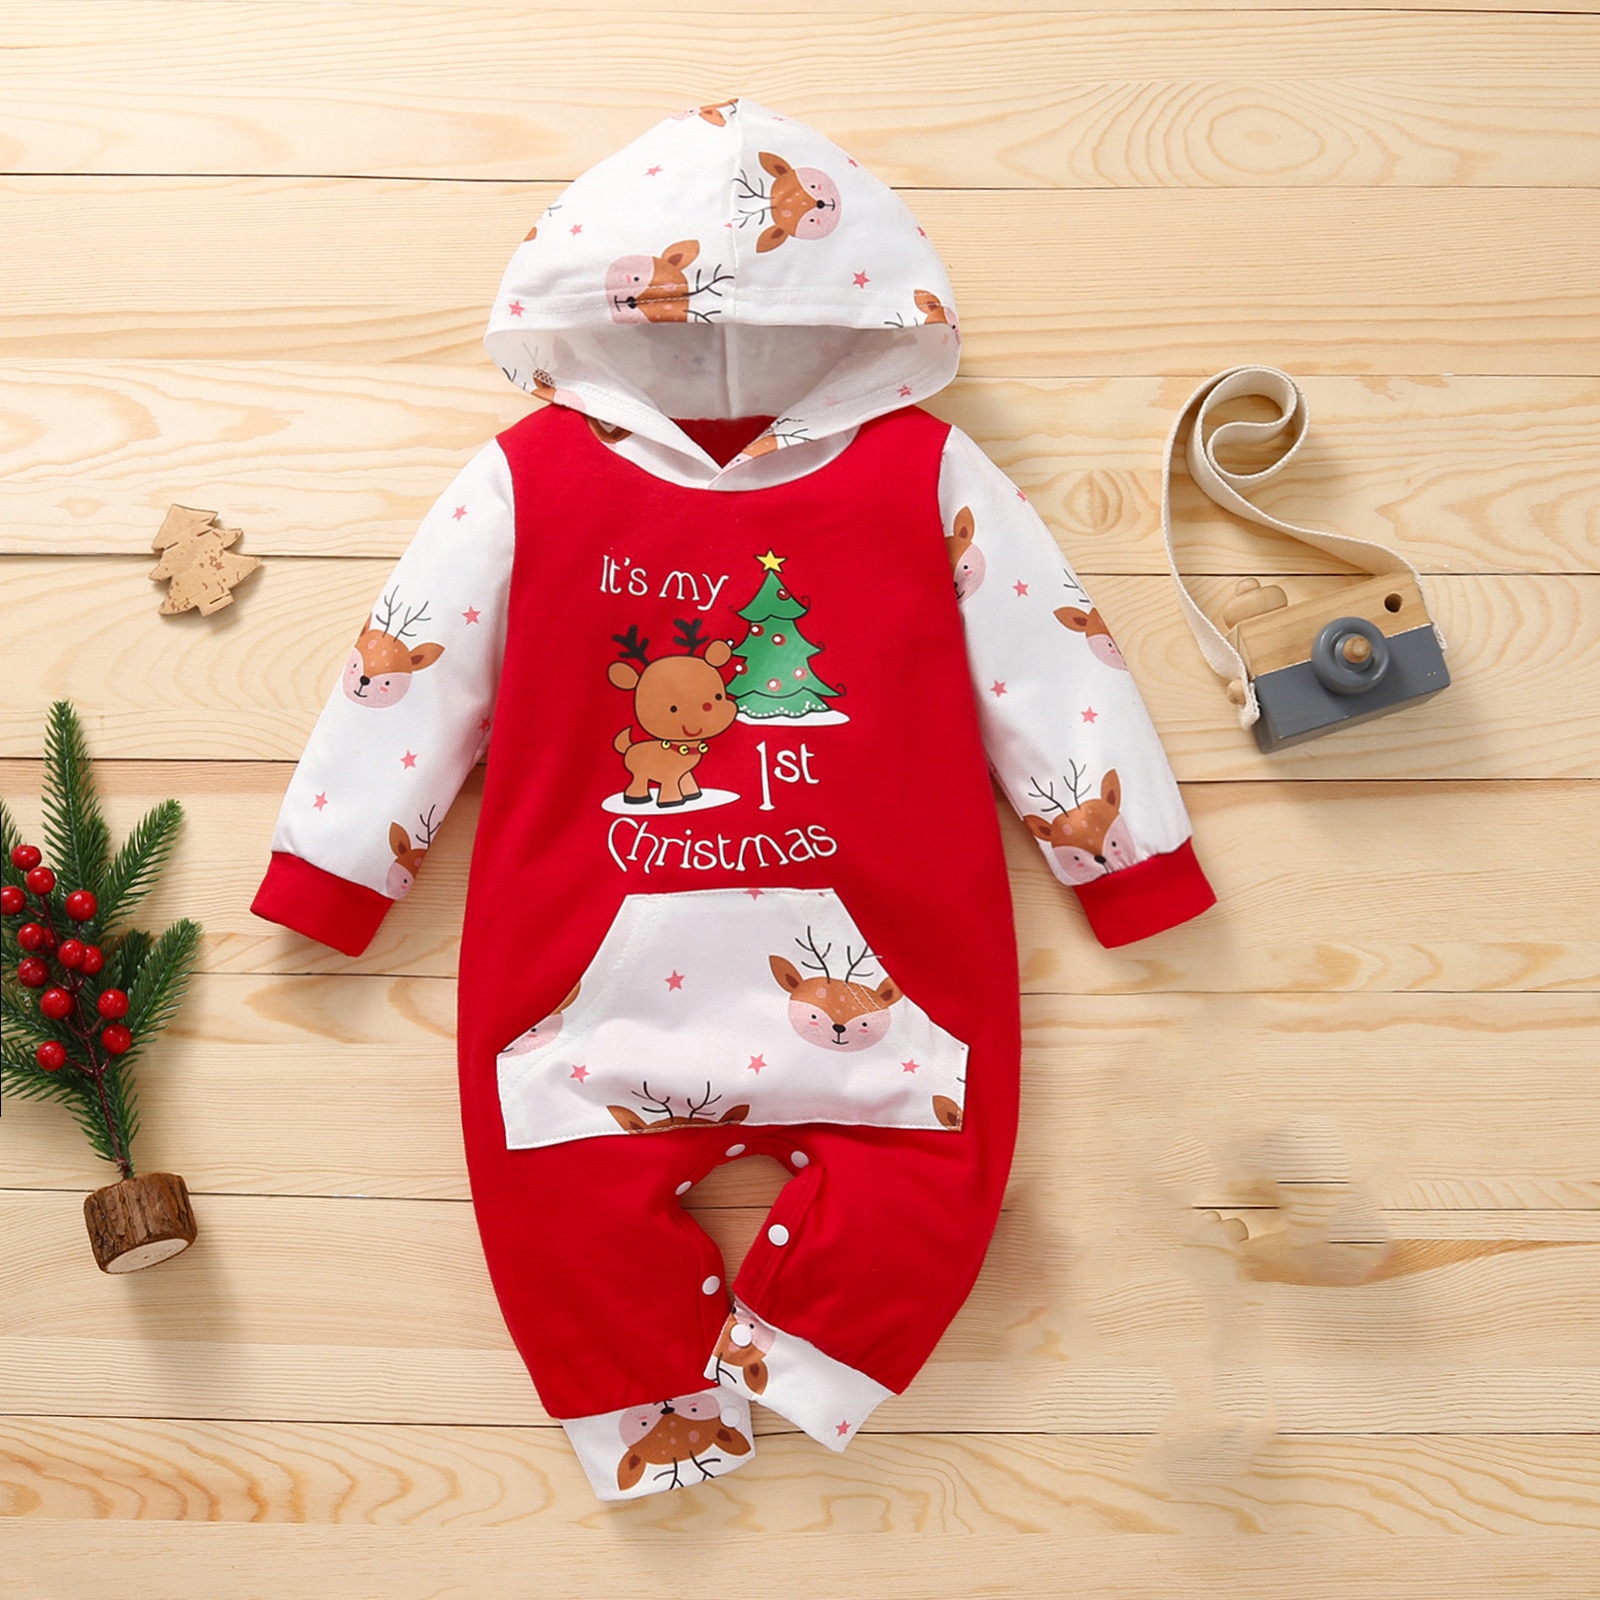 Newborn Baby Christmas Hooded Jumpsuit Boys Girls Bodysuits Outfits Costume Babany bebe Infant Xmas Playsuit Hoodies 1 1 - Christmas Onesie Merch